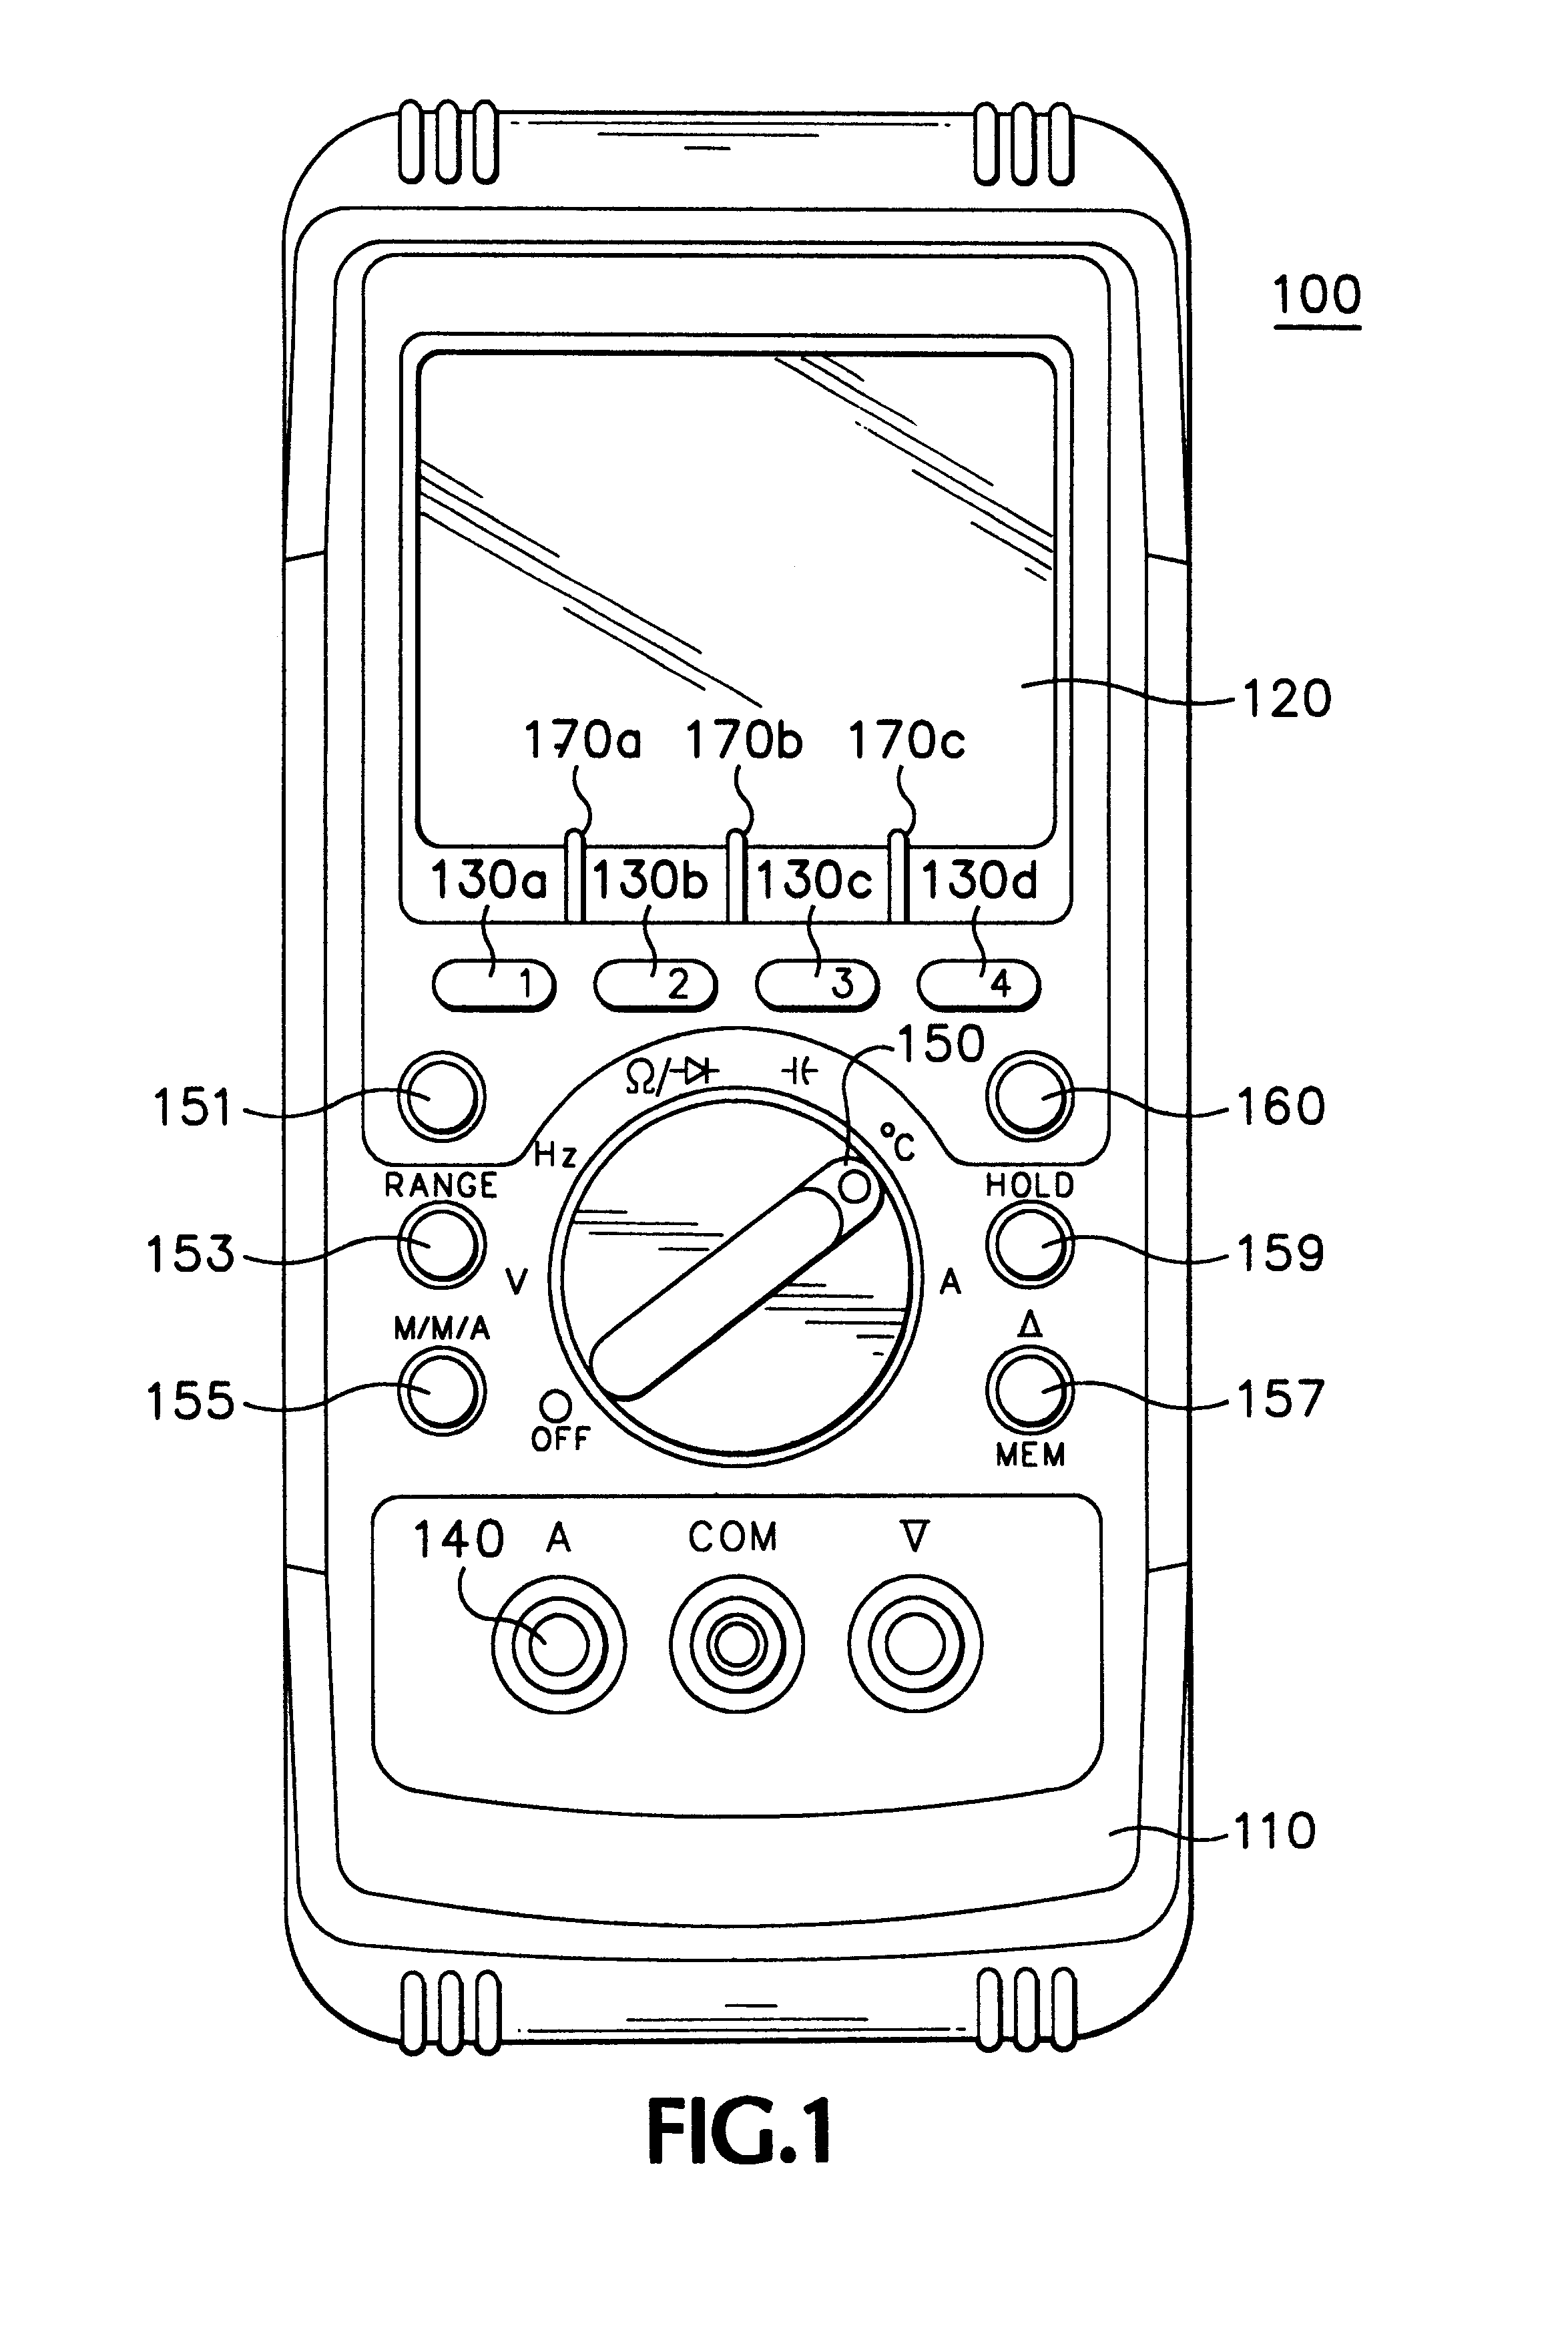 Simplified user interface and control system for a multimeter